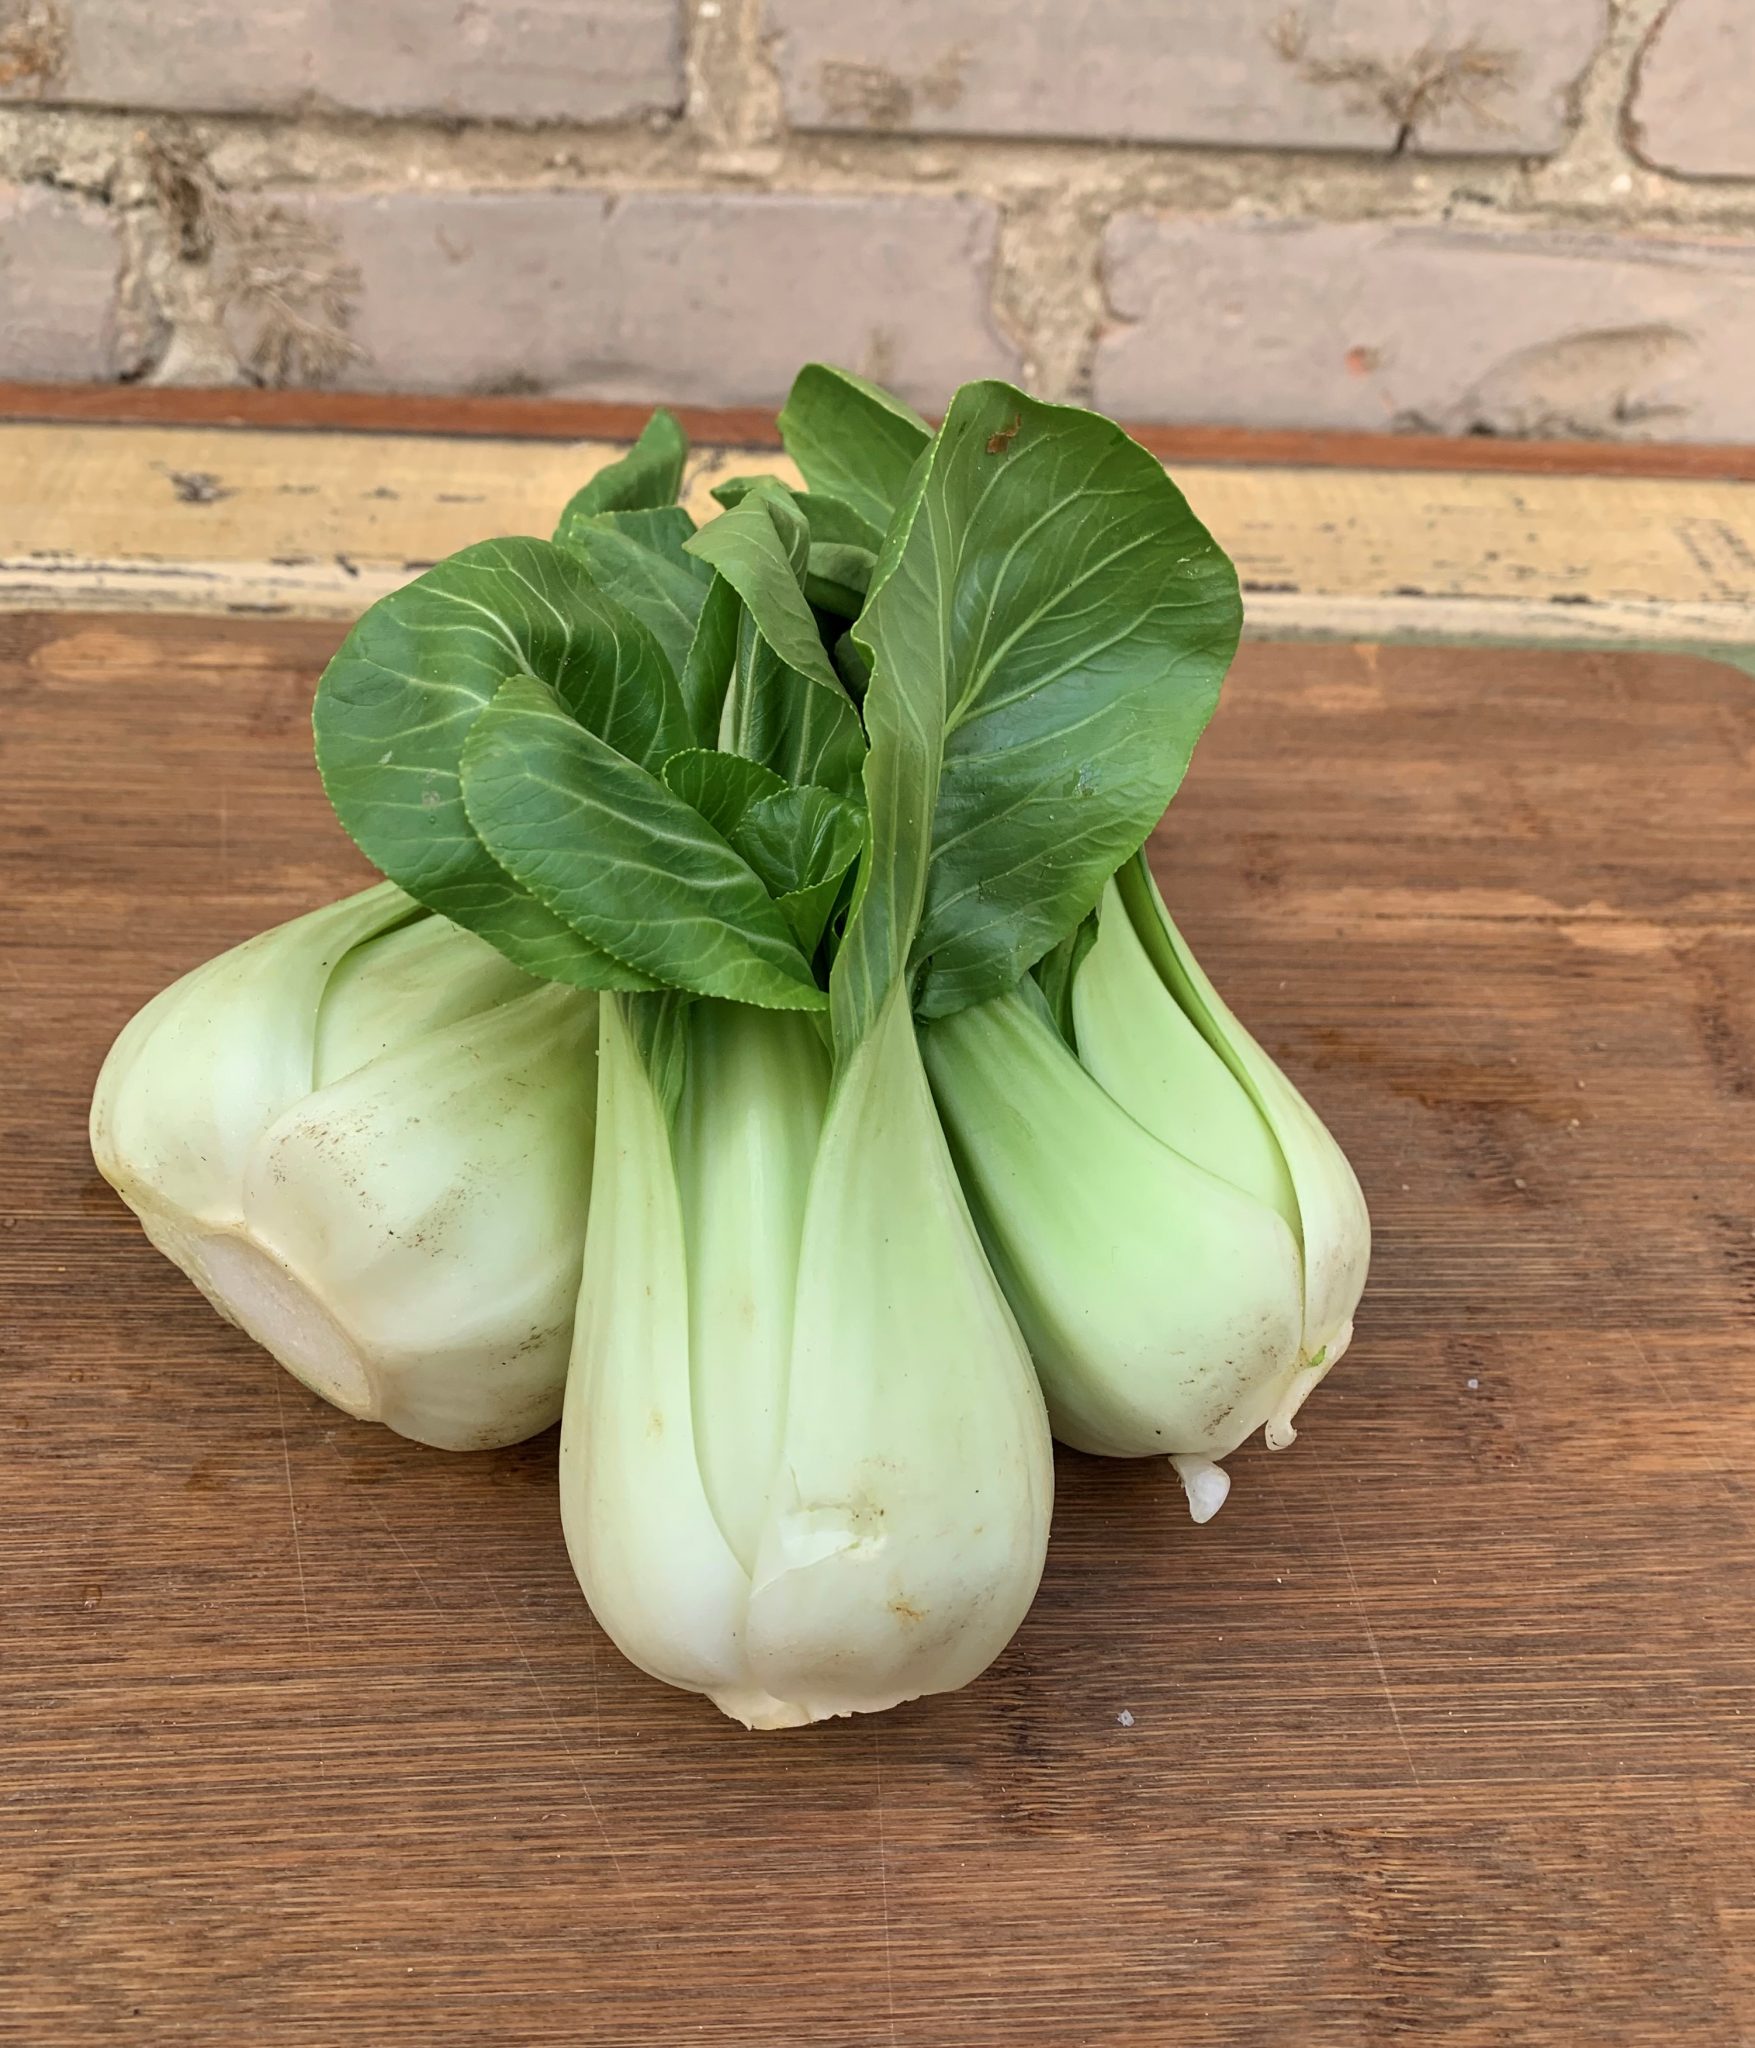 Collection 92+ Pictures show me a picture of bok choy Sharp